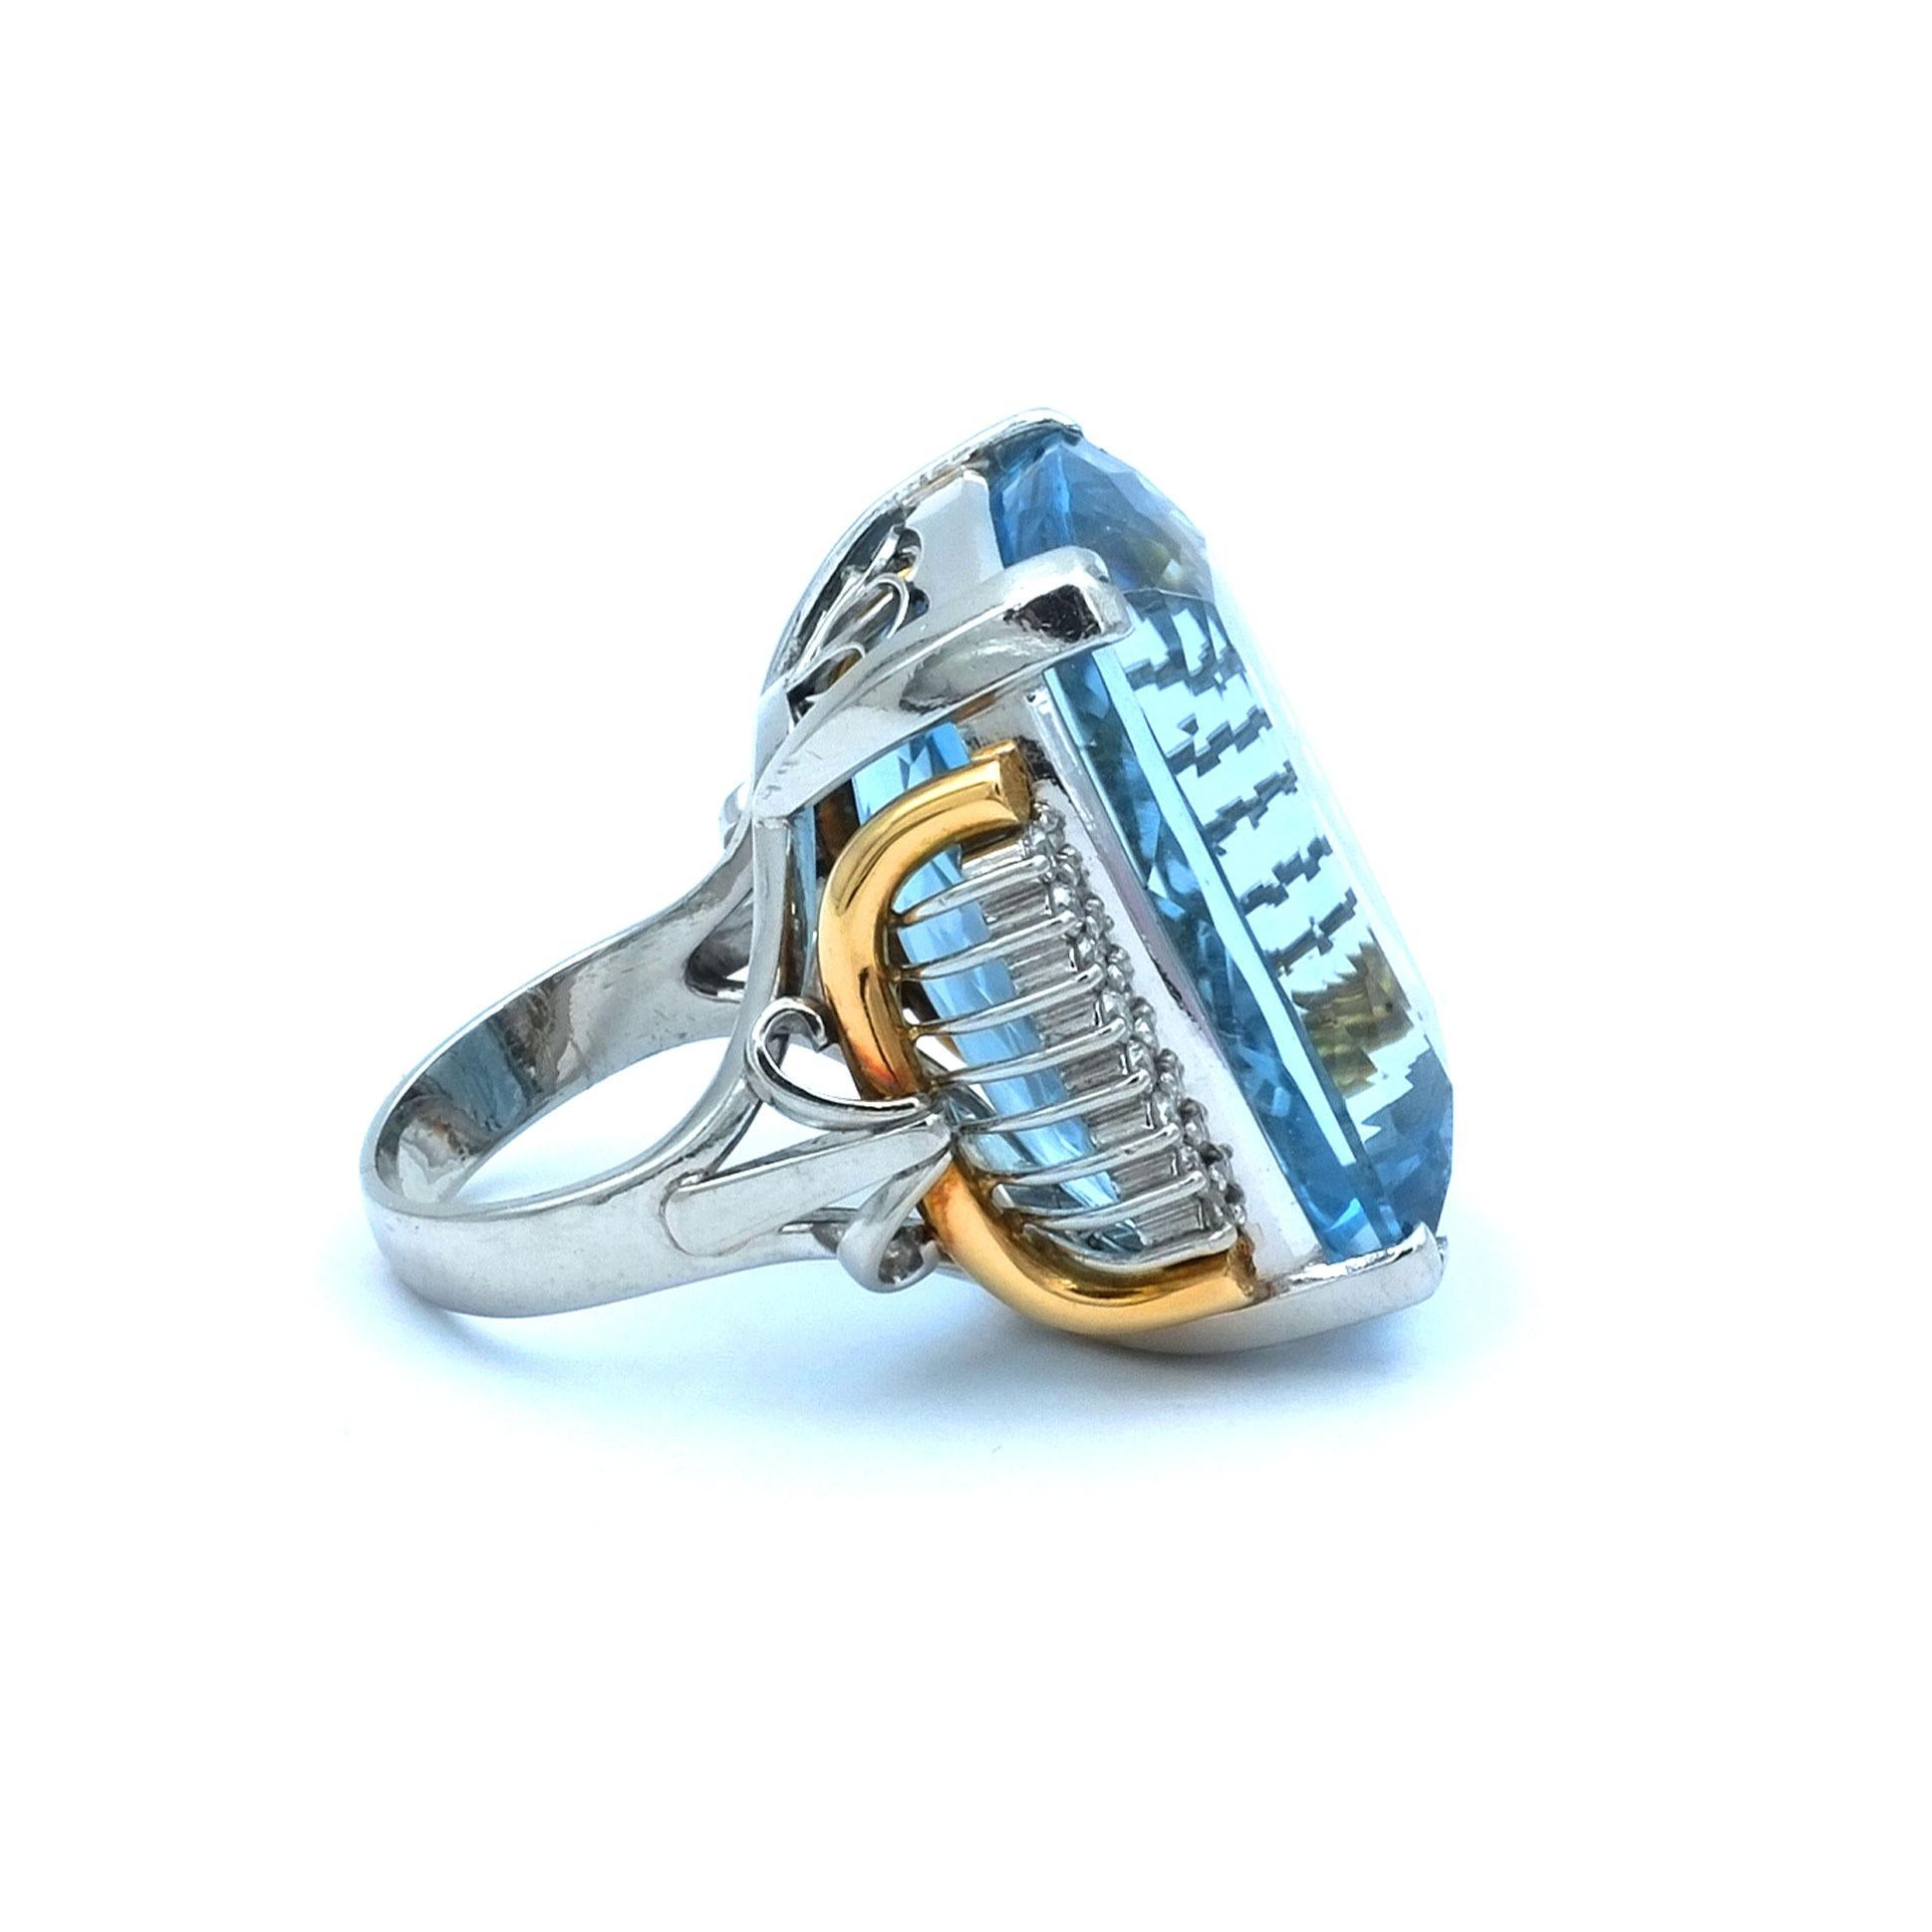 Certified 58 ct Blue Topaz Diamond Platinum and Gold Cocktail Ring circa 1940 In Good Condition For Sale In Goettingen, DE